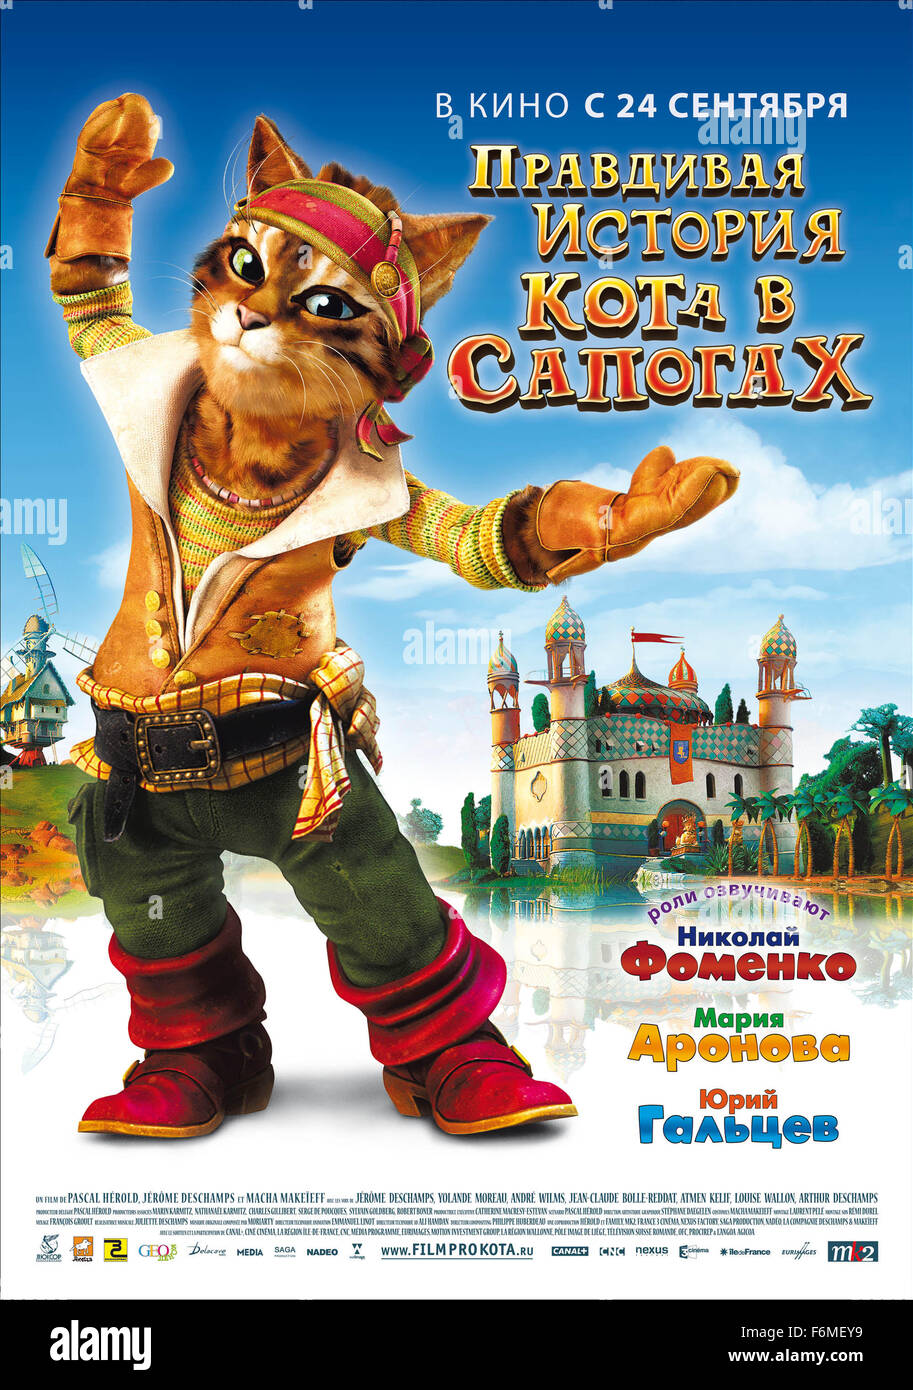 RELEASE DATE: 2009. MOVIE TITLE: The True Story of Puss'N Boot. STUDIO:  Herold and Family. PLOT: A free adaptation of Charles Perrault's famous Puss 'n Boots,The True Story of Puss'n Boots is a